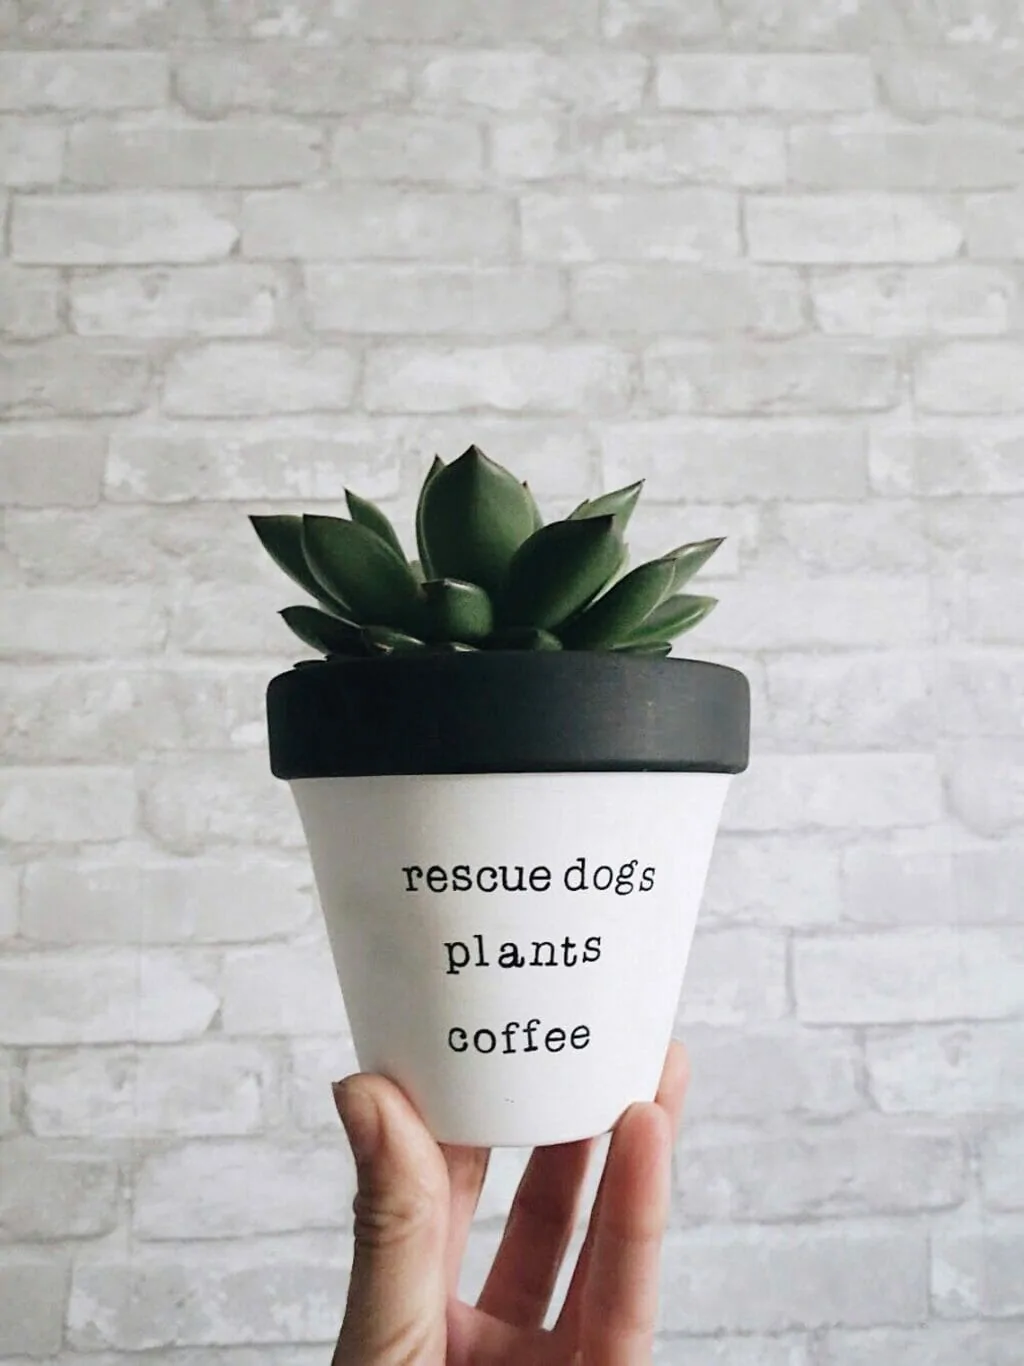 a hand is holding up a painted white terracotta pot with a black rim says :rescude dogs. plants. coffee." against a grey brick background